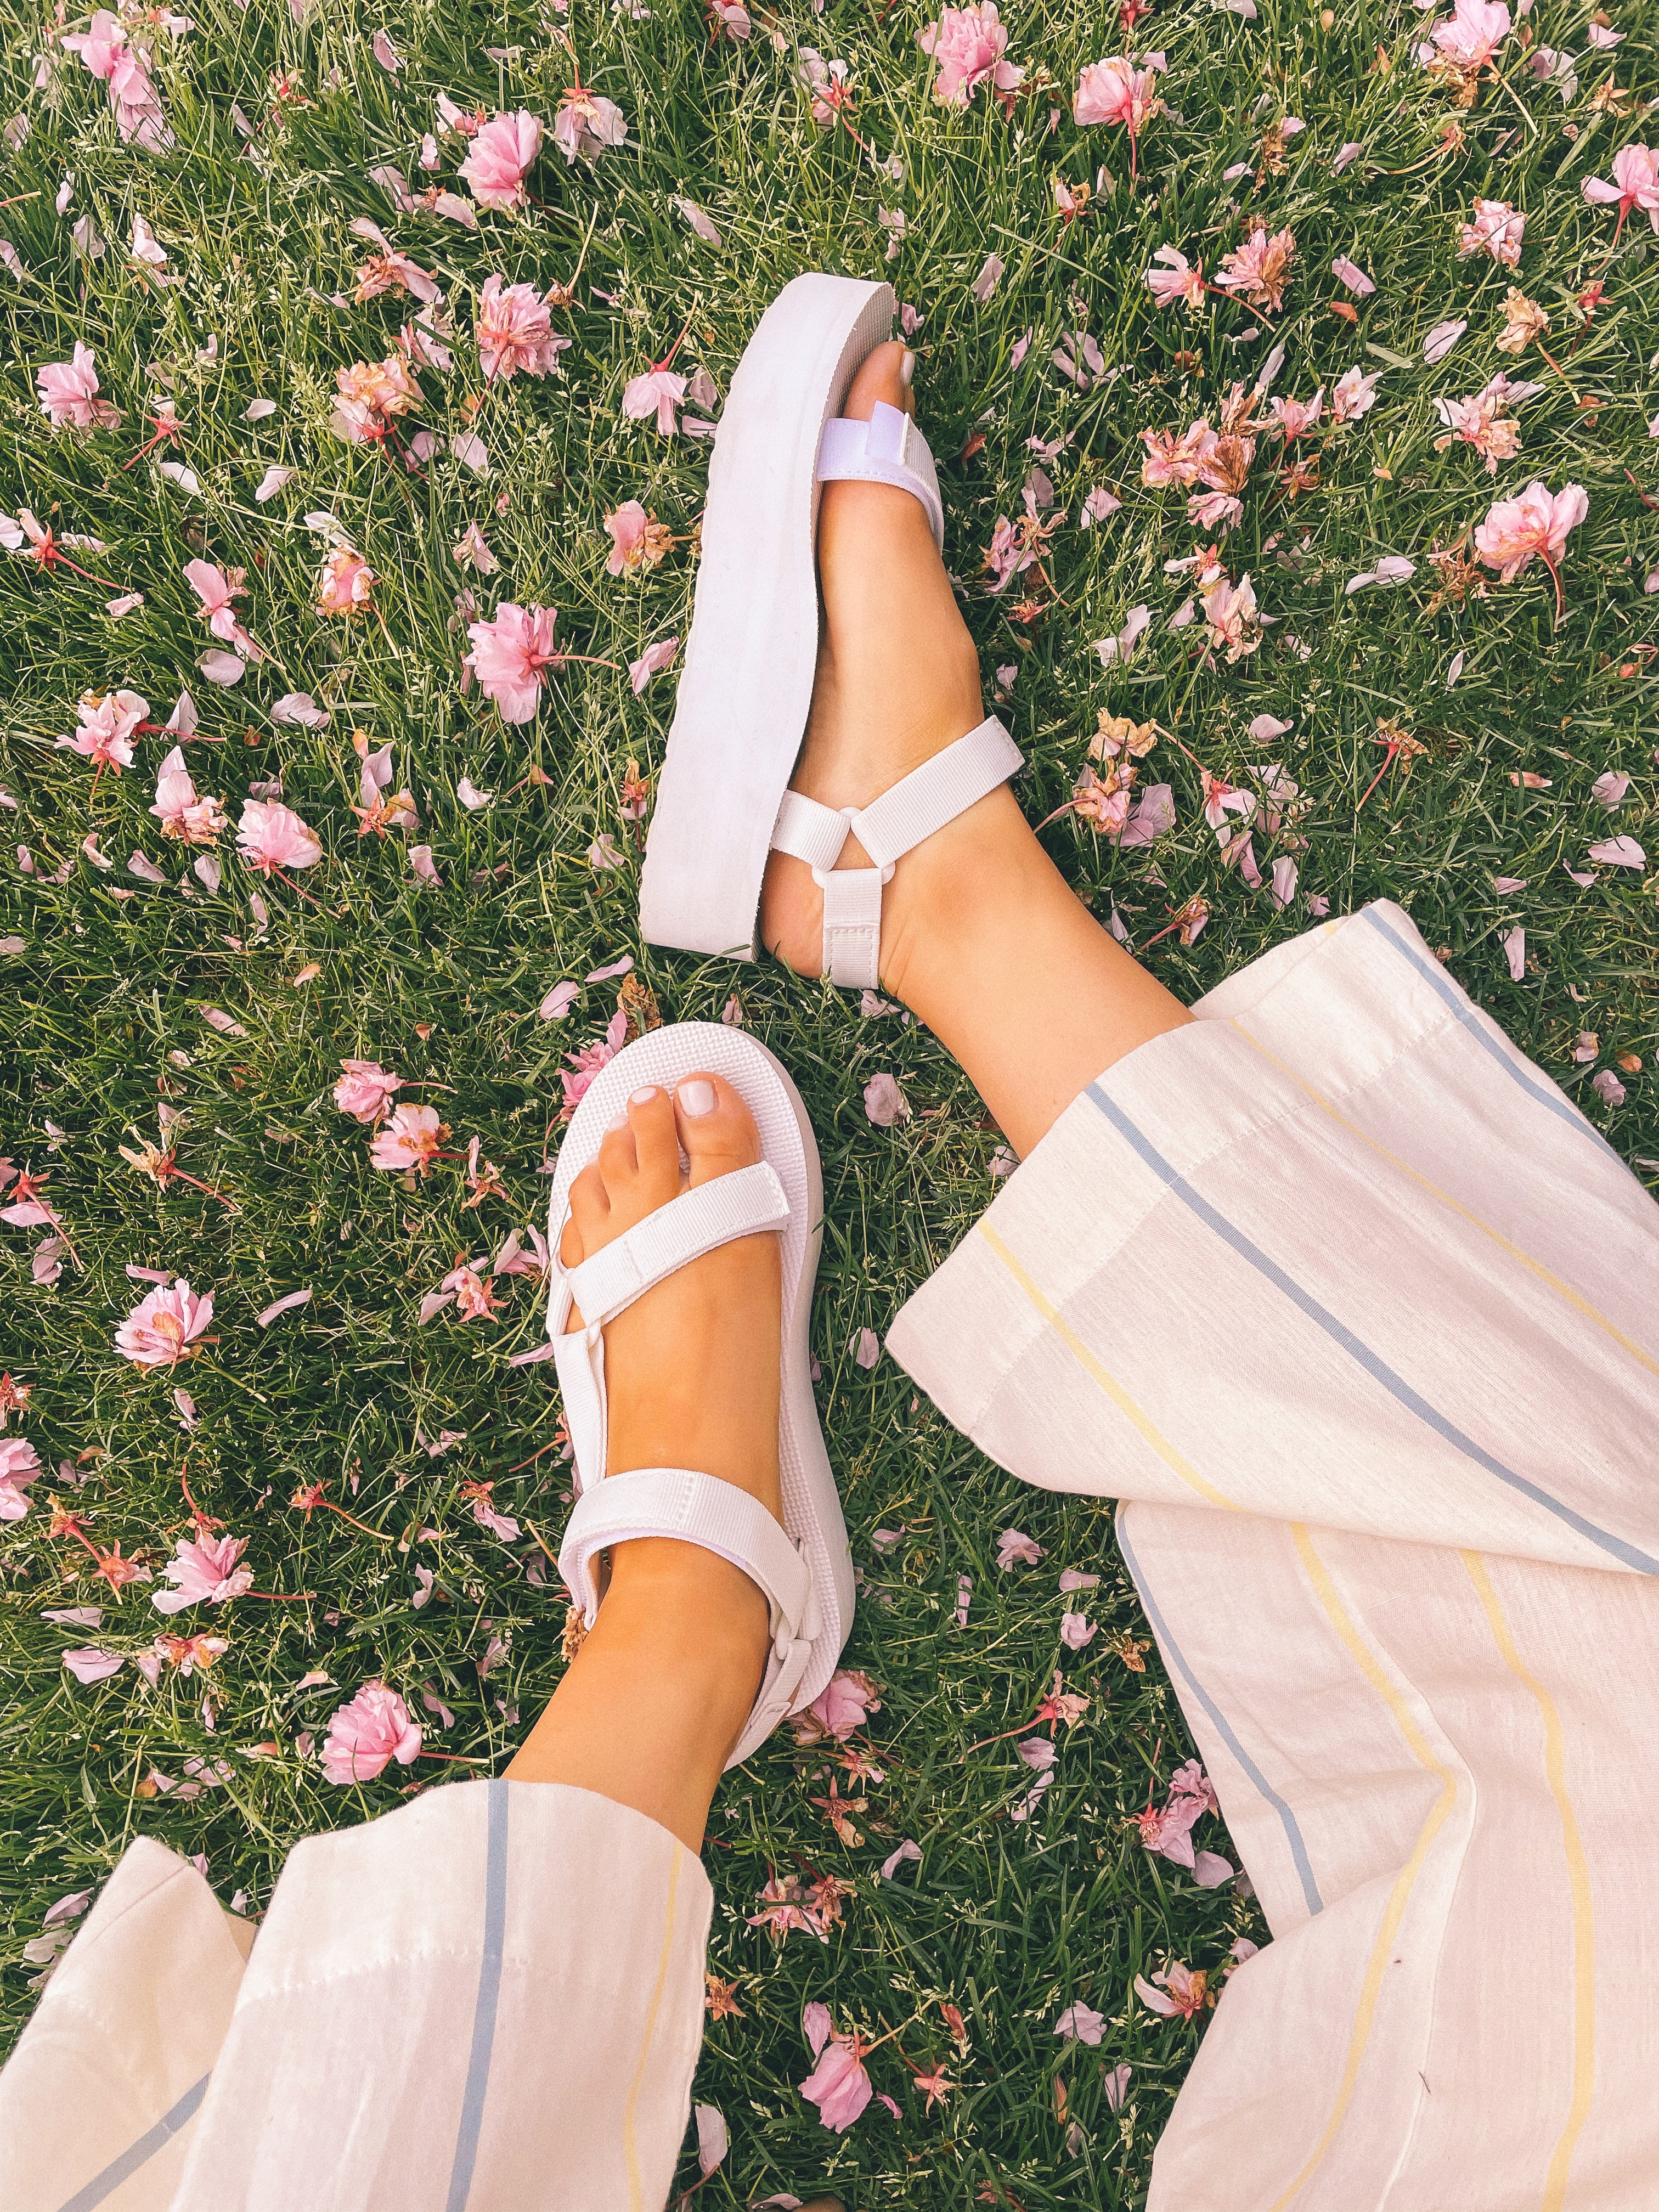 Platform white Teva sandals paired with striped pants in a field of flowers